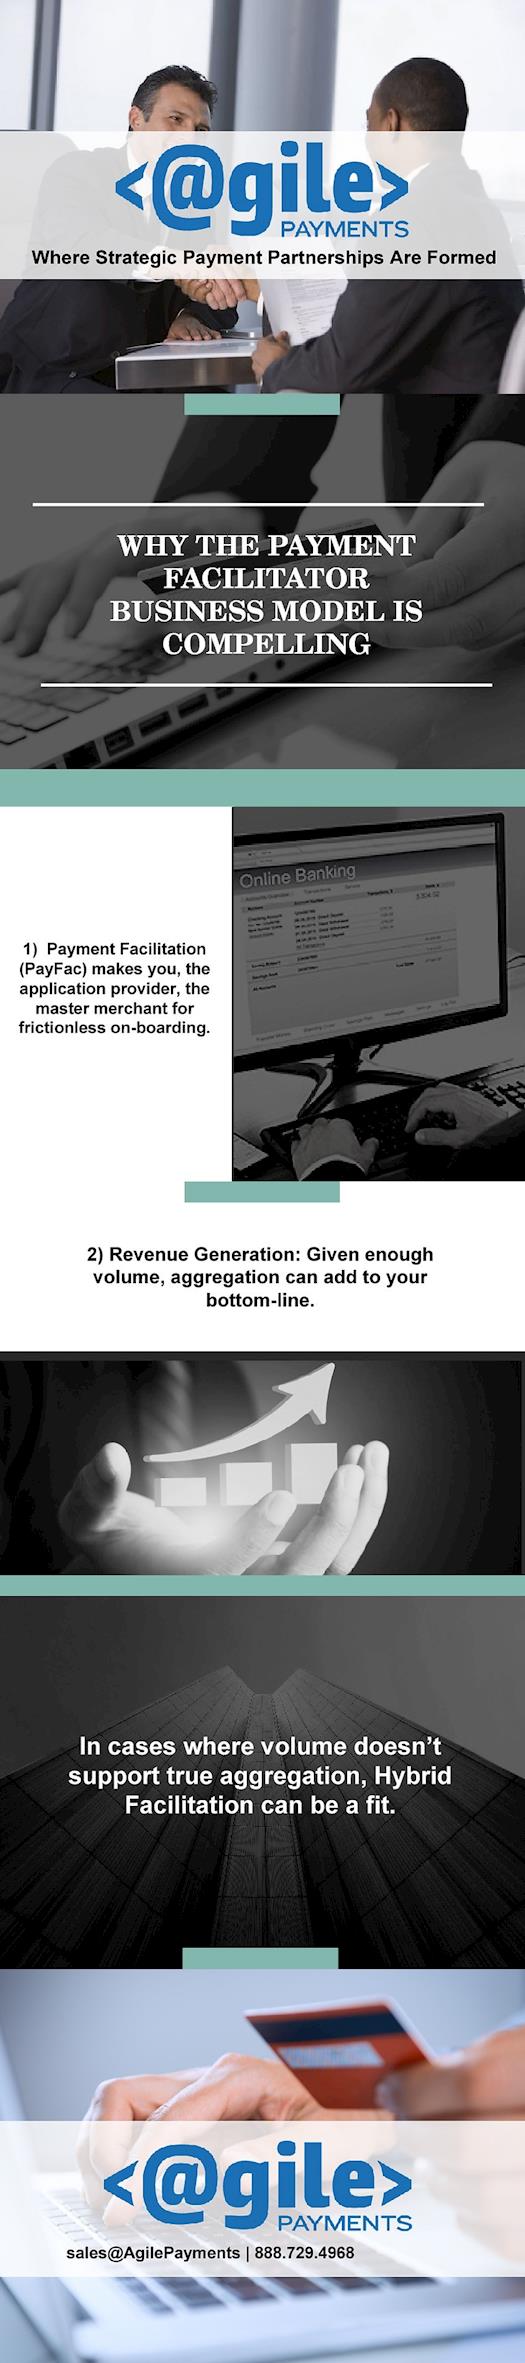 The Payment Facilitator Business Model